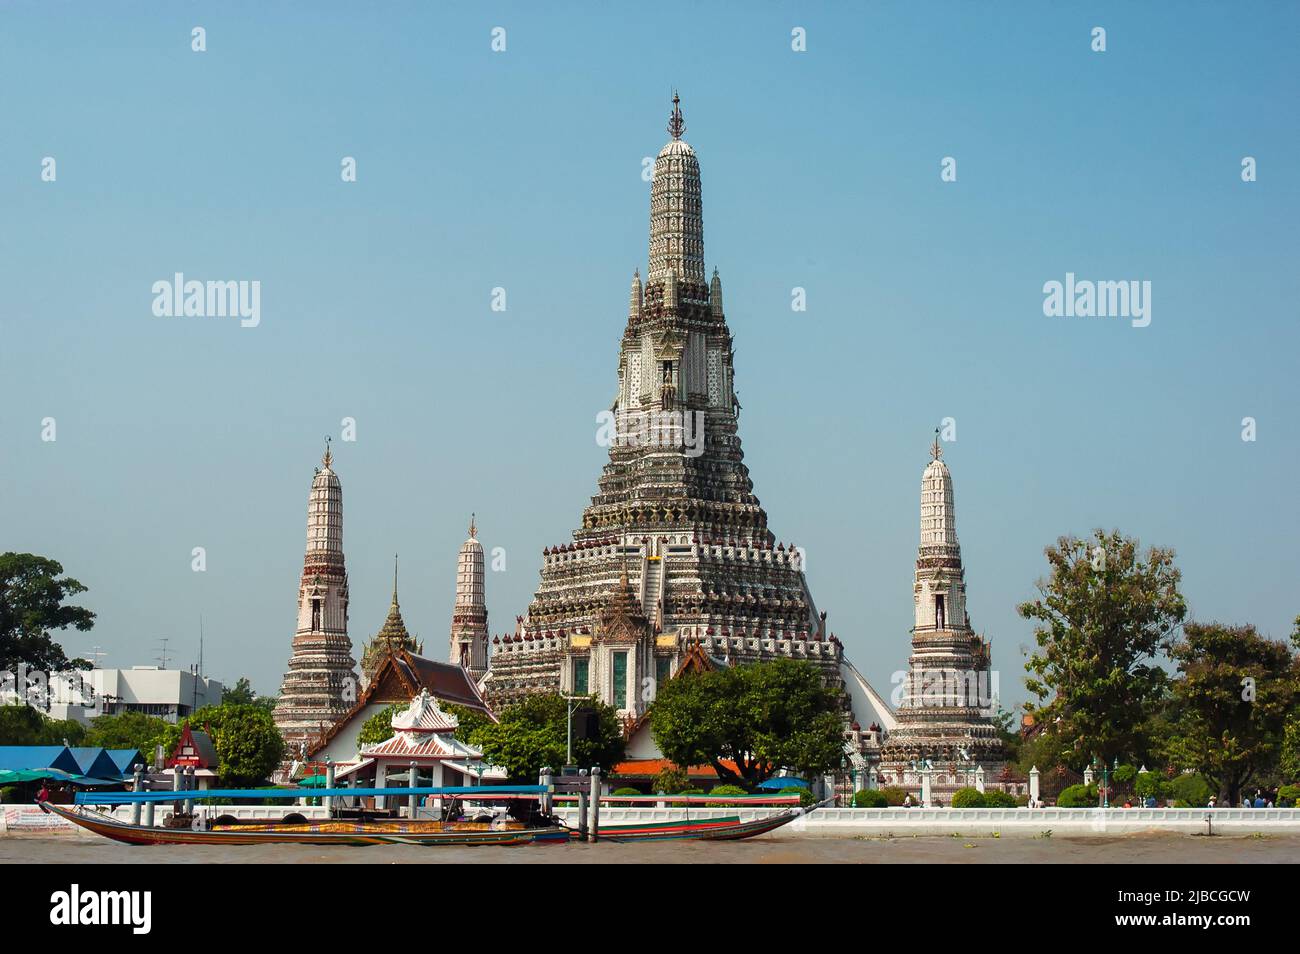 Wat Arun, the Temple of Dawn, by the Chao Phraya River with a passing boat, Bangkok, Thailand Stock Photo